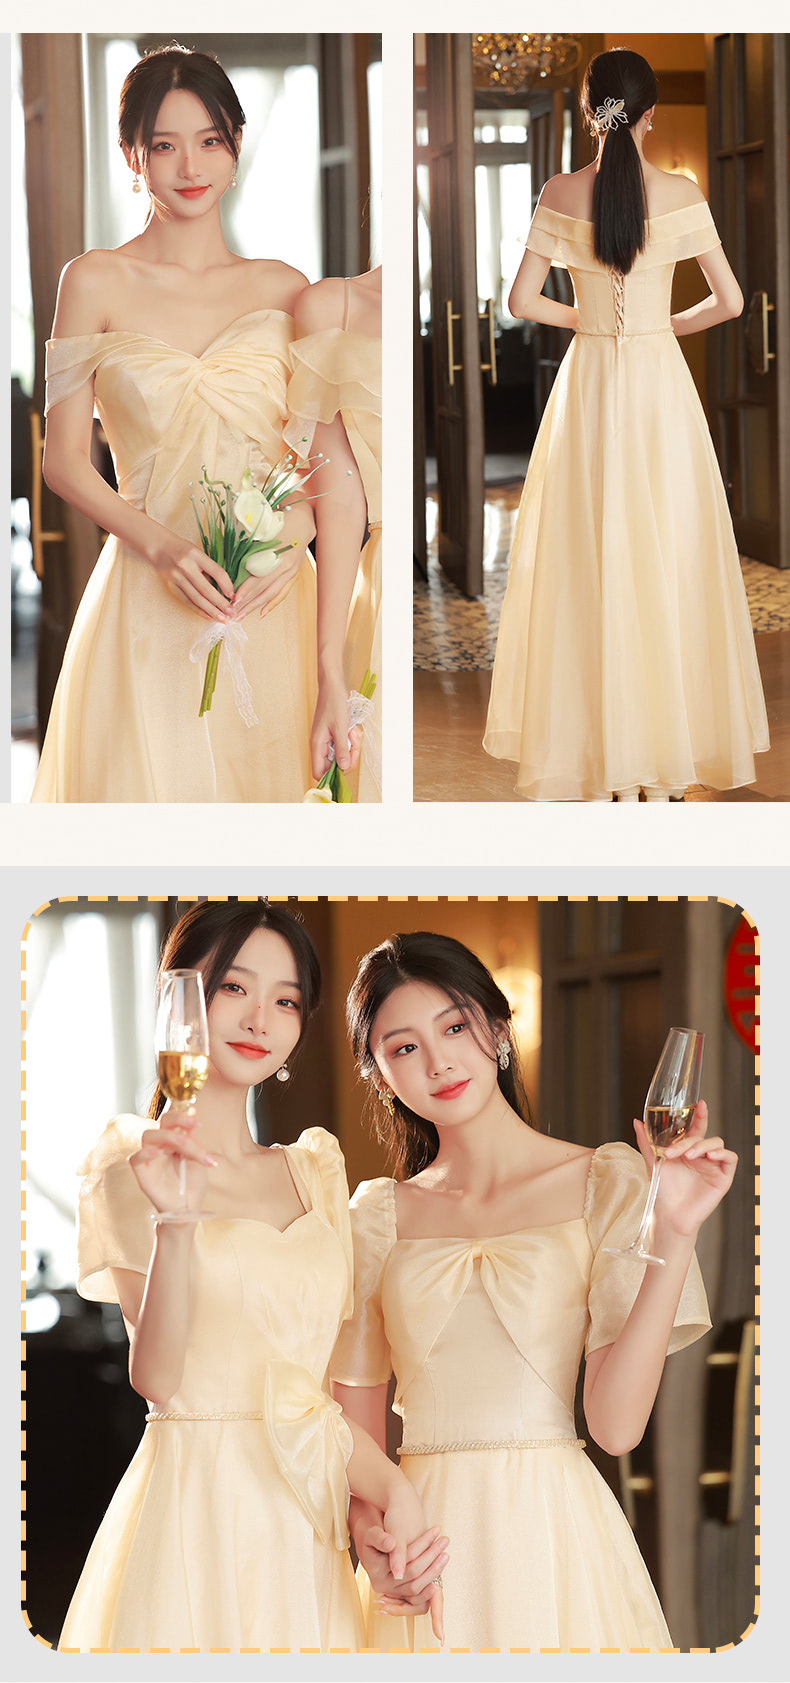 Champagne-Bridesmaid-Cocktail-Party-Long-Dress-Formal-Gown18.jpg